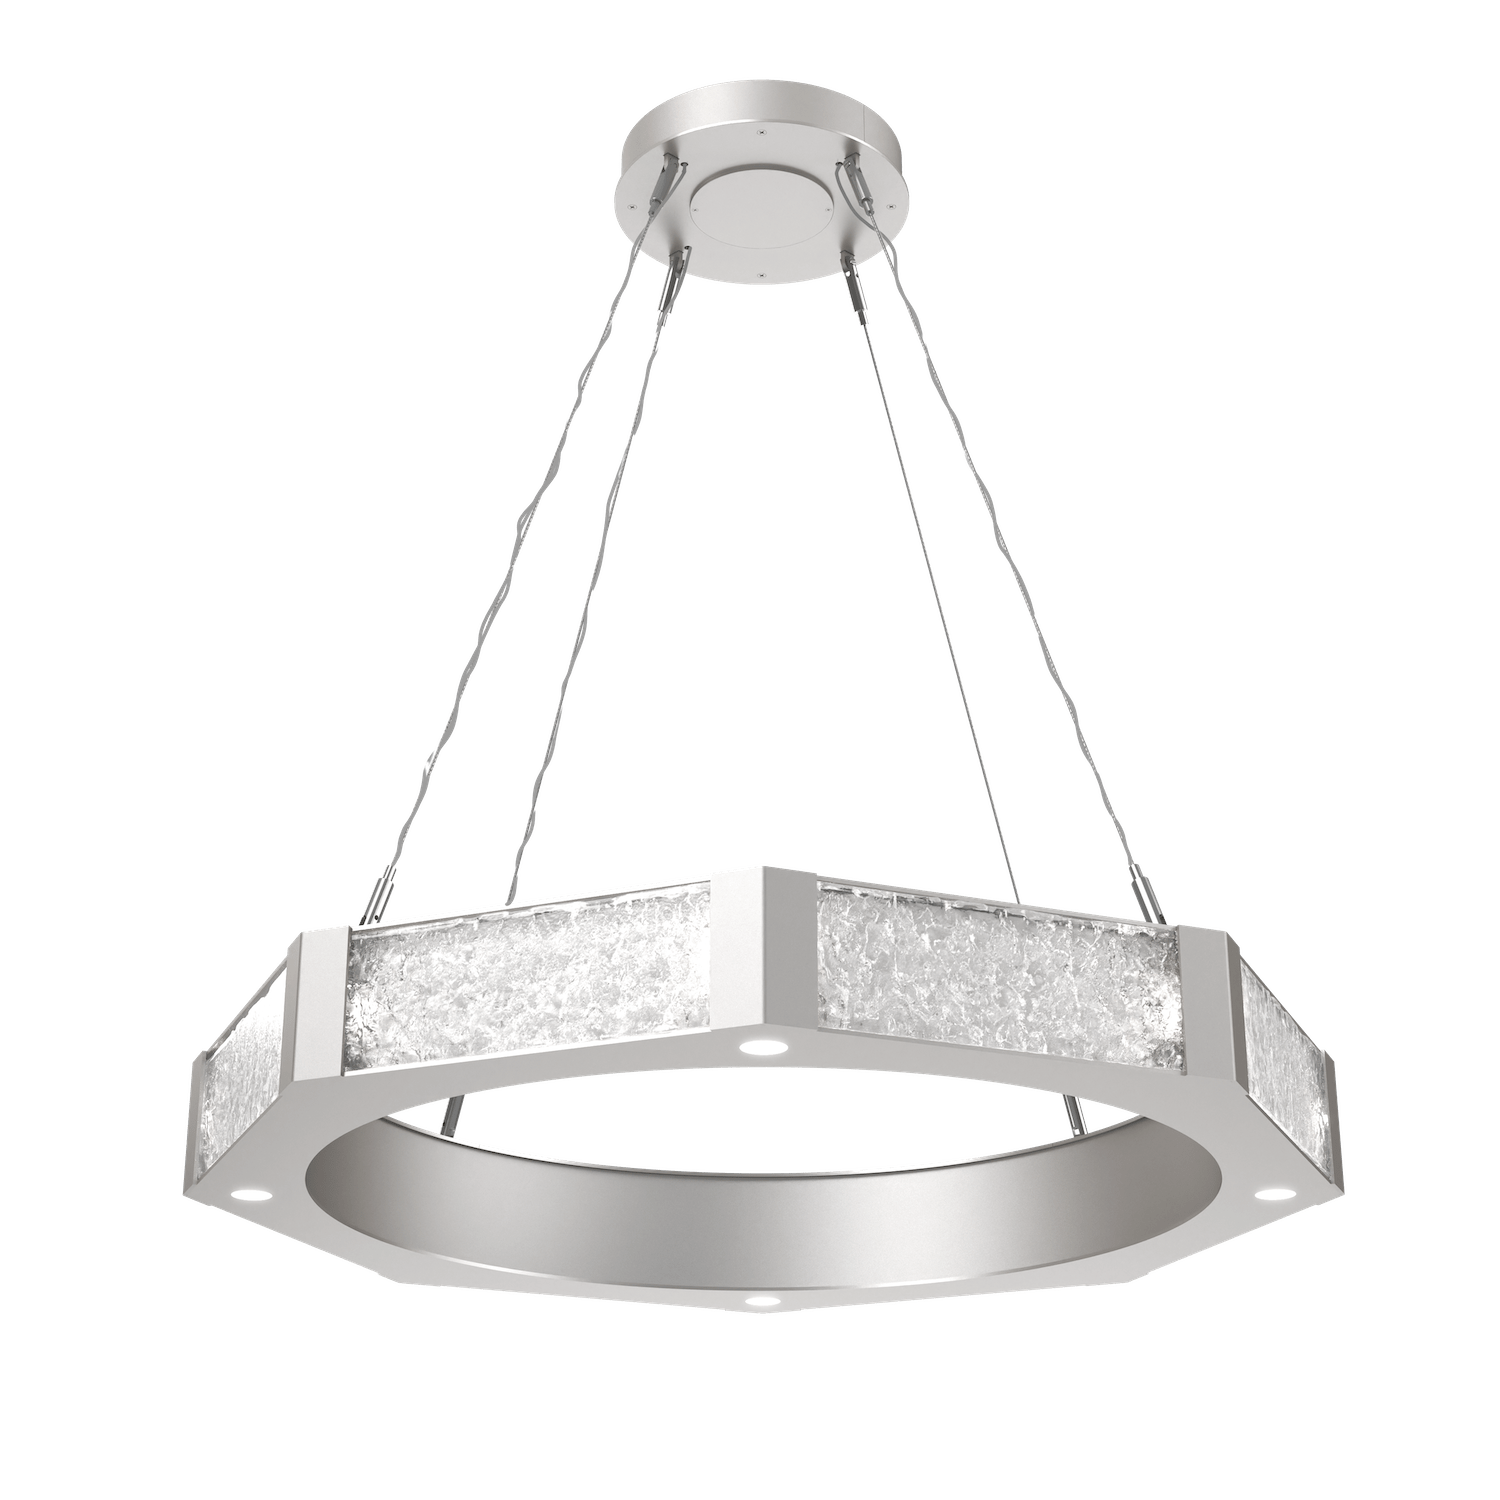 CHB0061-36-BS-GC-Hammerton-Studio-Glacier-36-inch-ring-chandelier-with-metallic-beige-silver-finish-and-clear-blown-glass-with-geo-clear-cast-glass-diffusers-and-LED-lamping